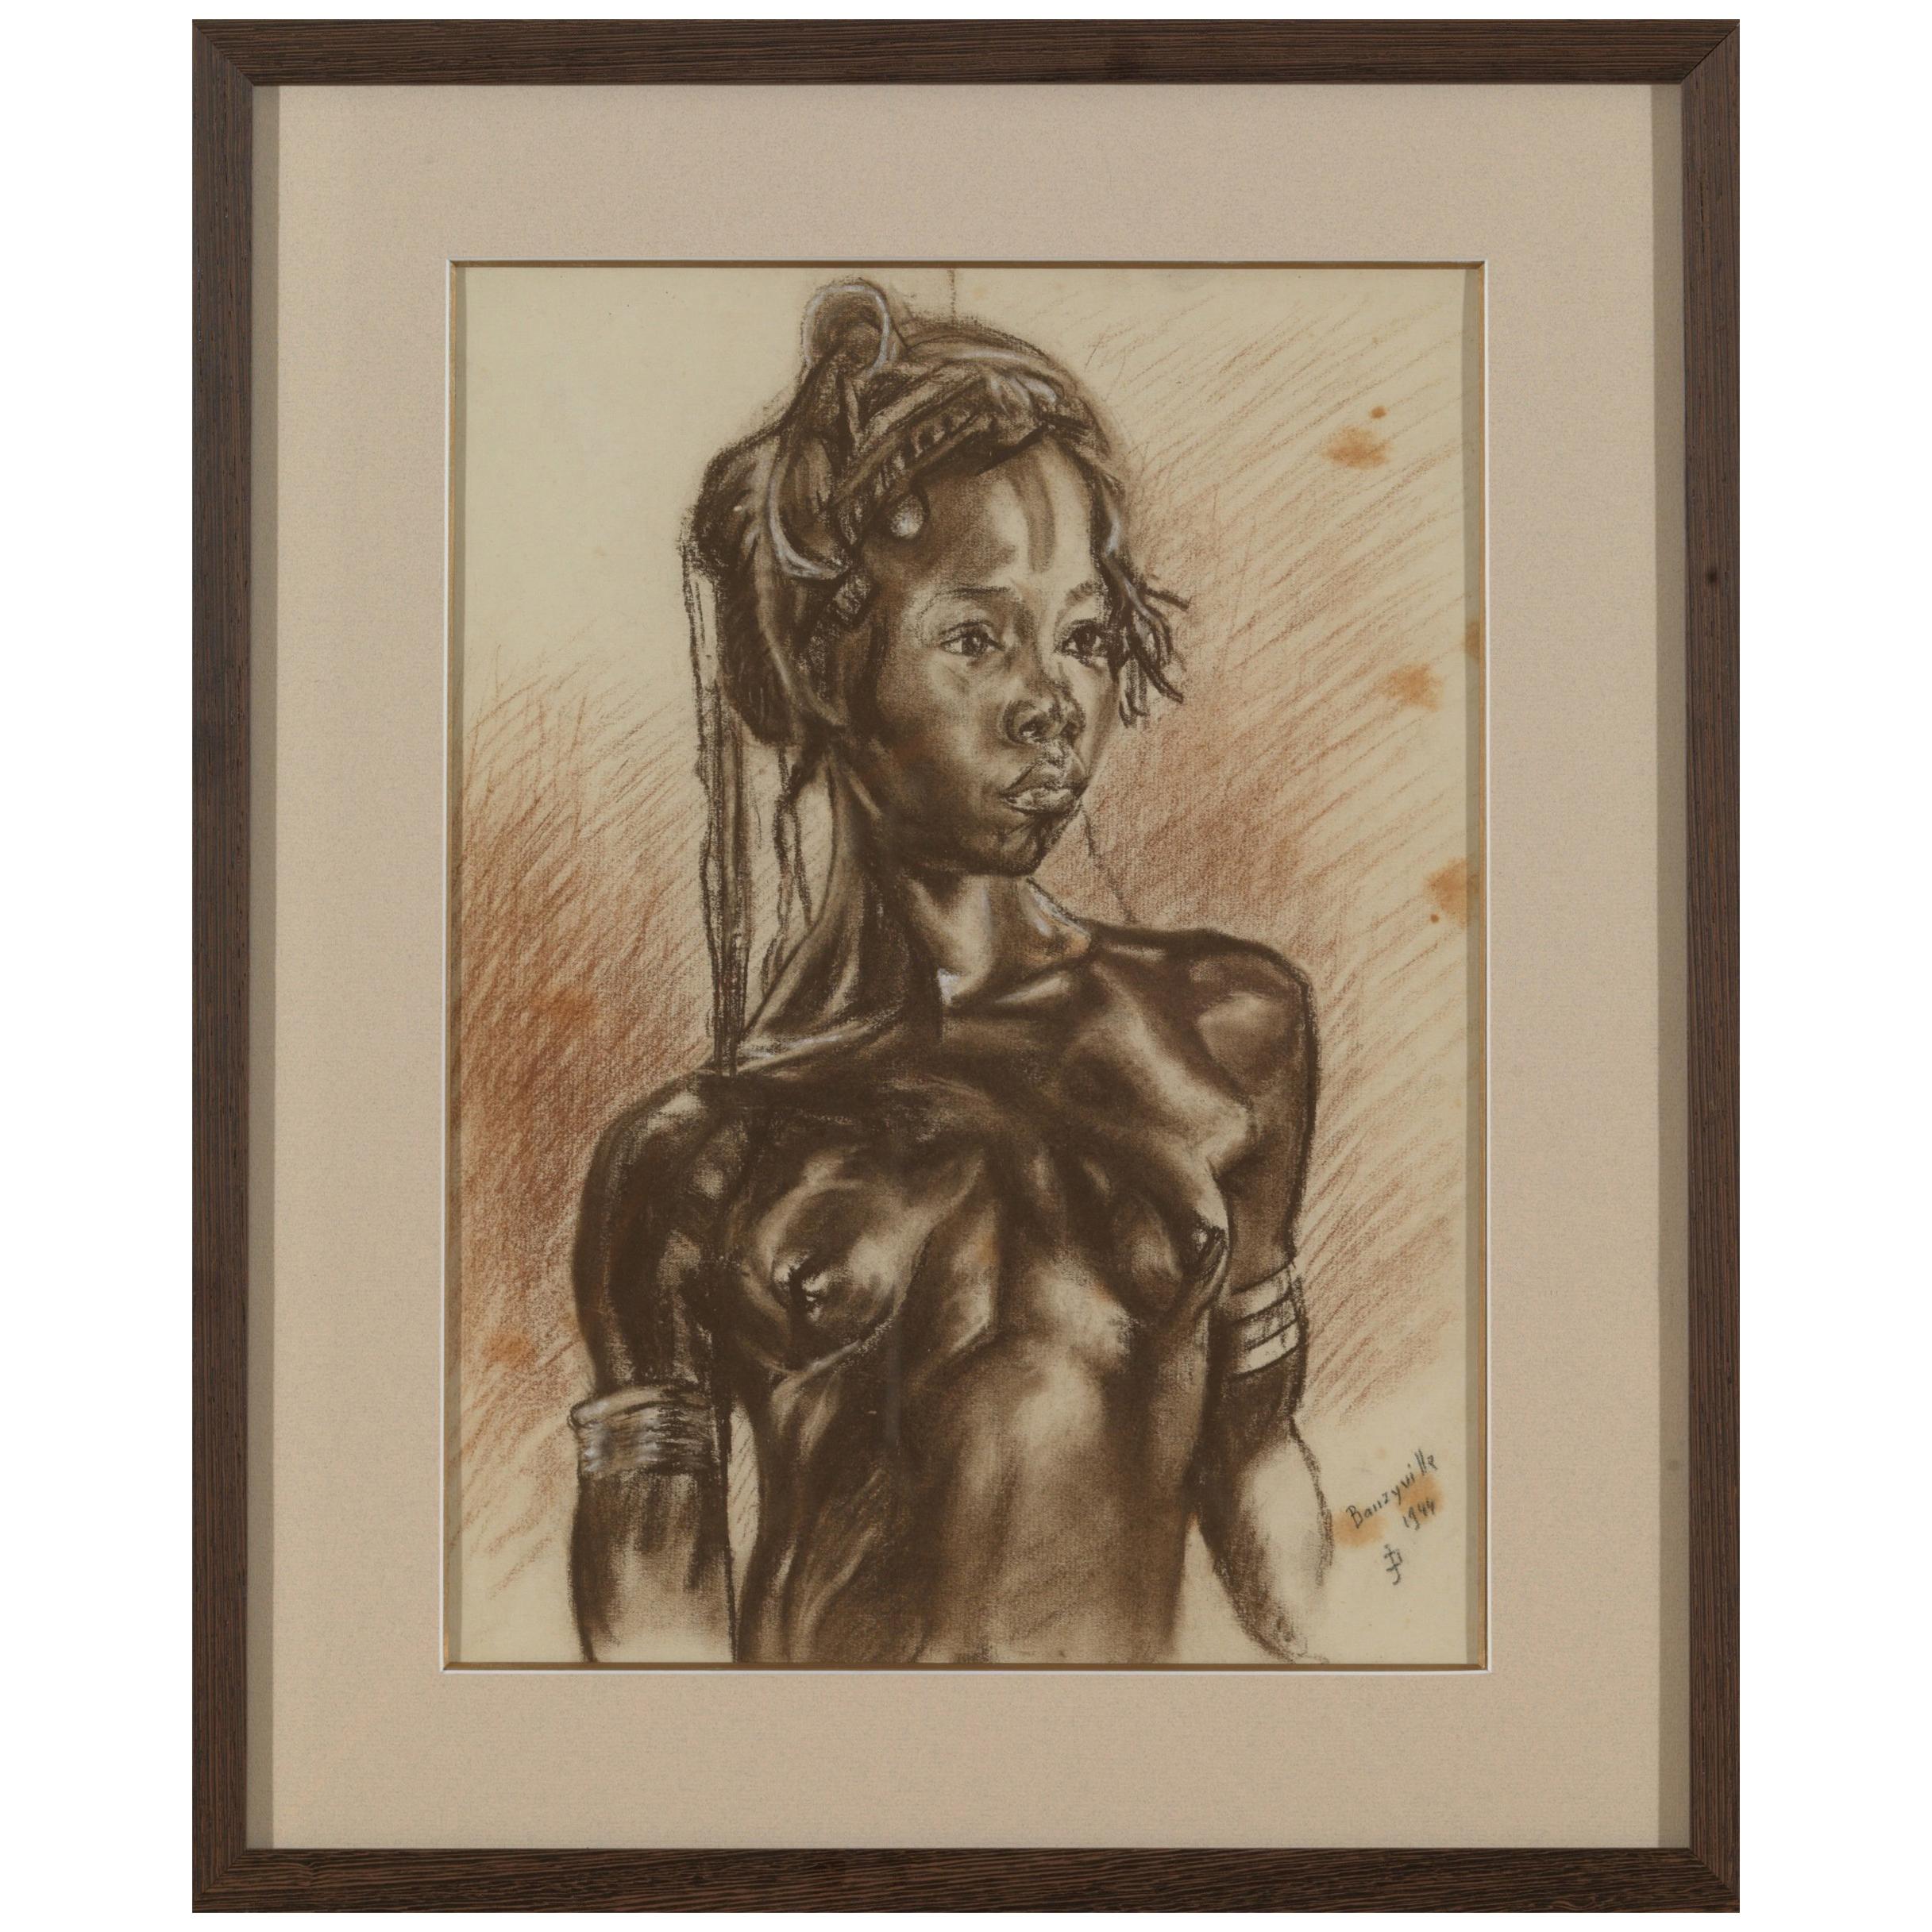 C.P. Initials, Portait of African Girl, Charcoal on Paper, Signed Banzyville 1944